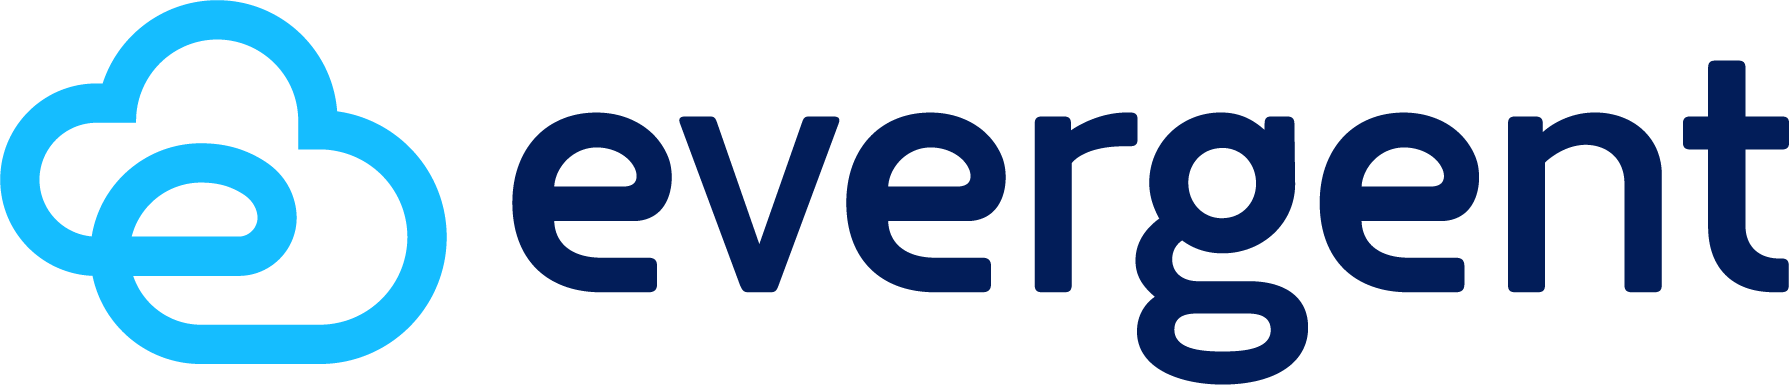 Evergent Partners with SKY Perfect JSAT to Support Subscriber Management On Leading OTT Service